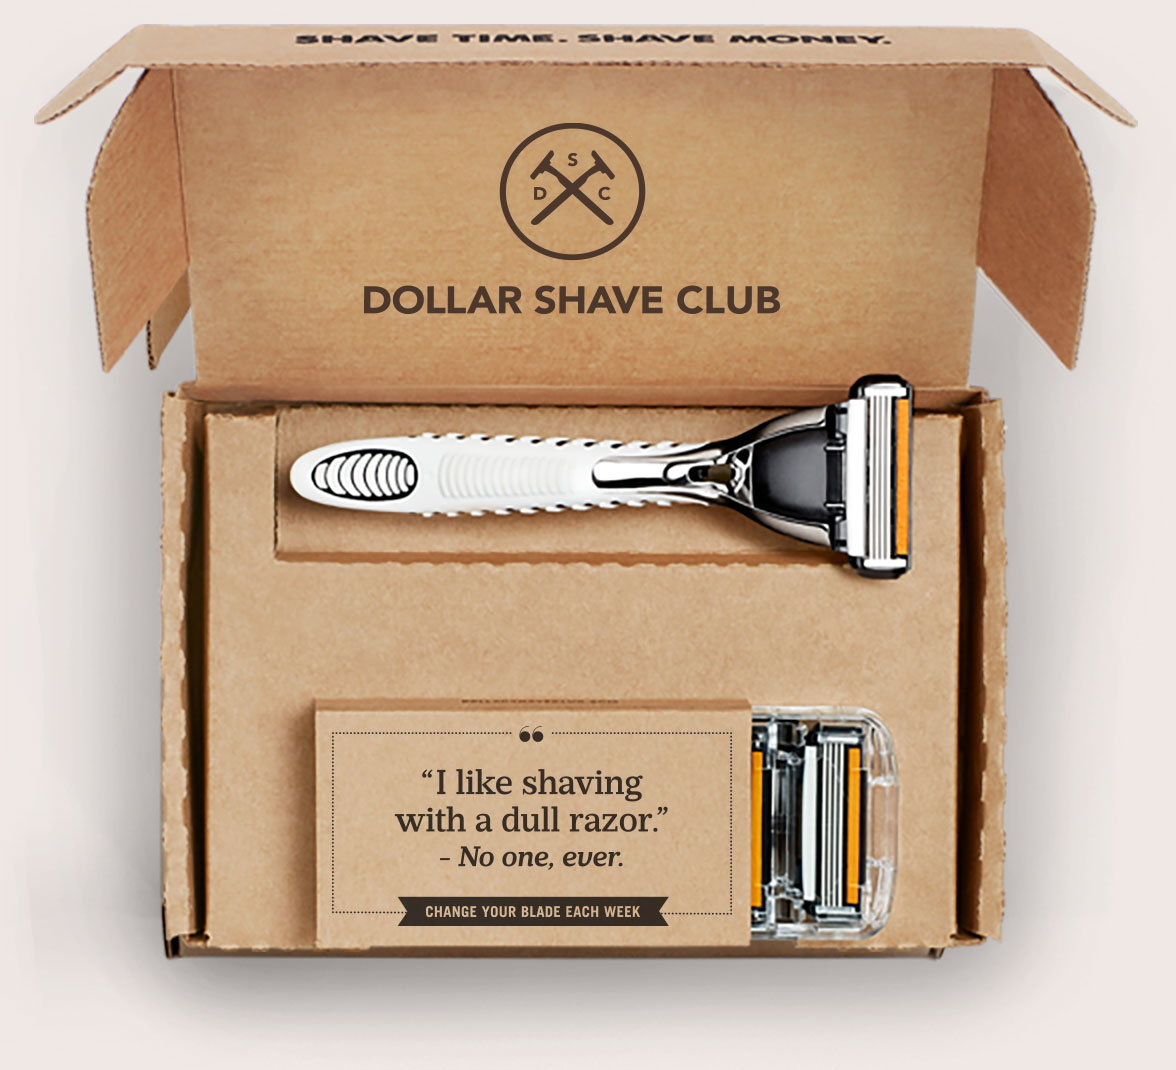 One Wipe Charlies Butt Wipes – Dollar Shave Club